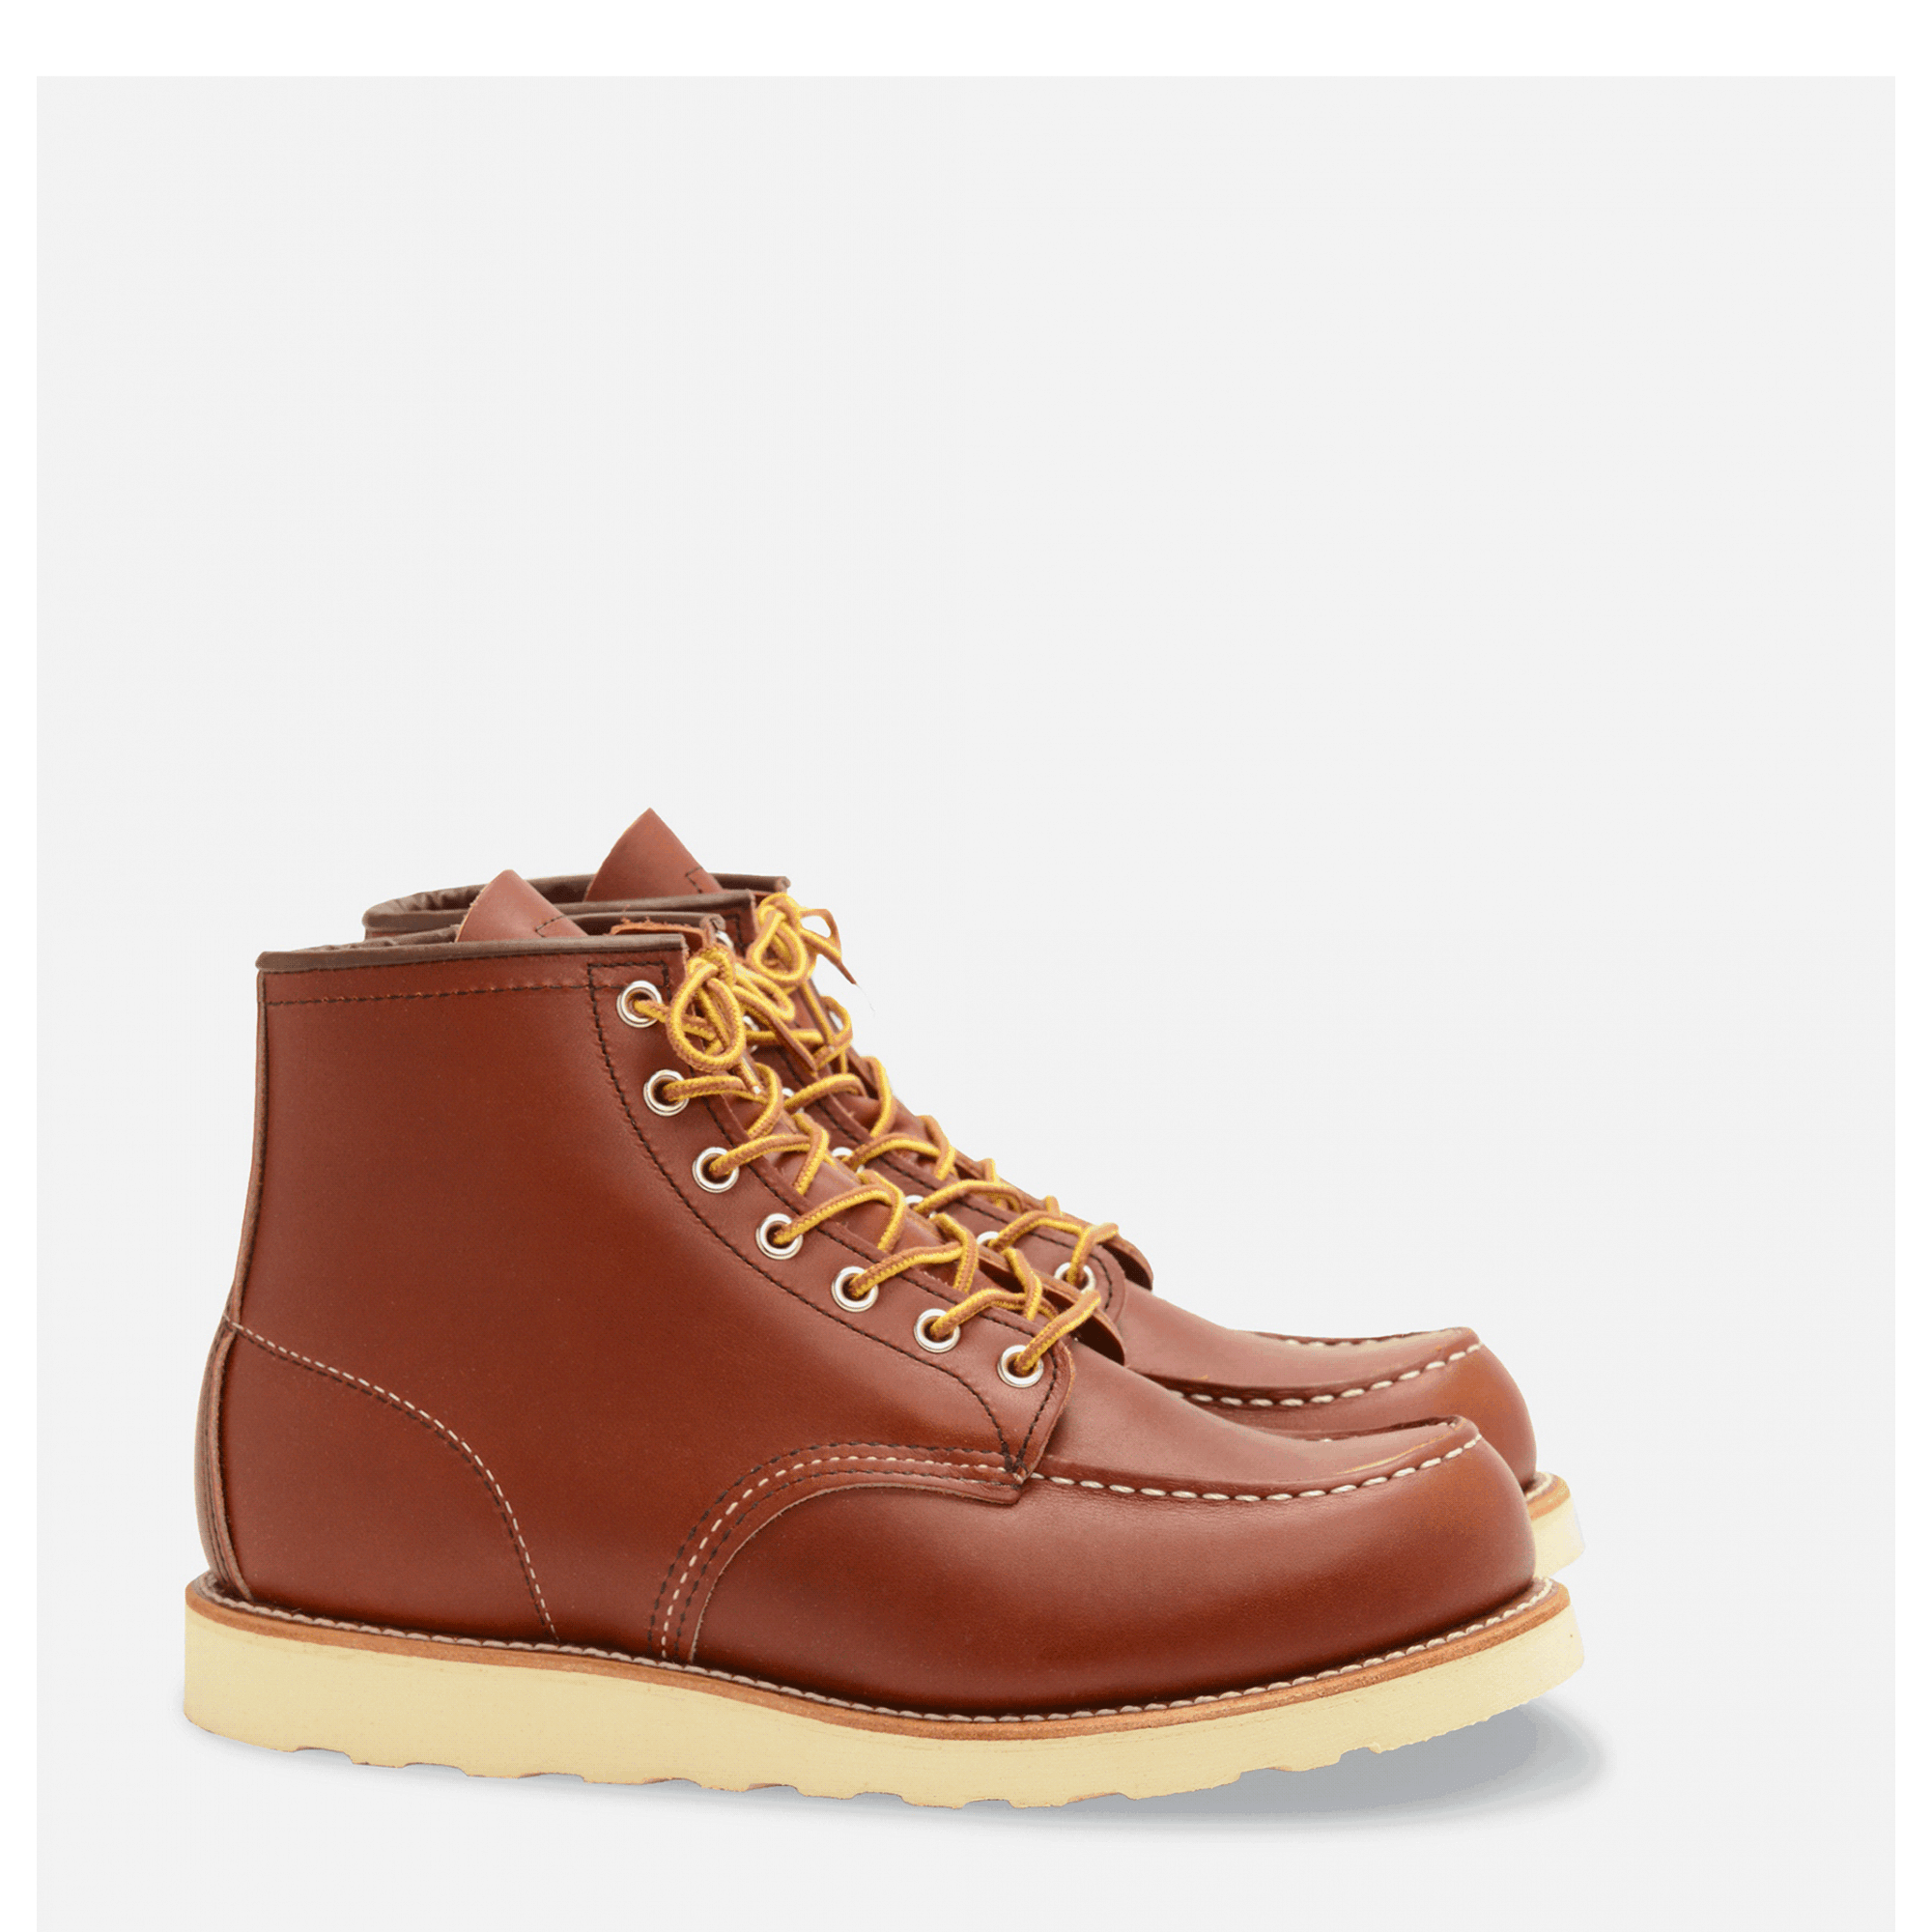 Red Wing Shoes | Moc Toe 8131 | Royalcheese Paris - Royalcheese